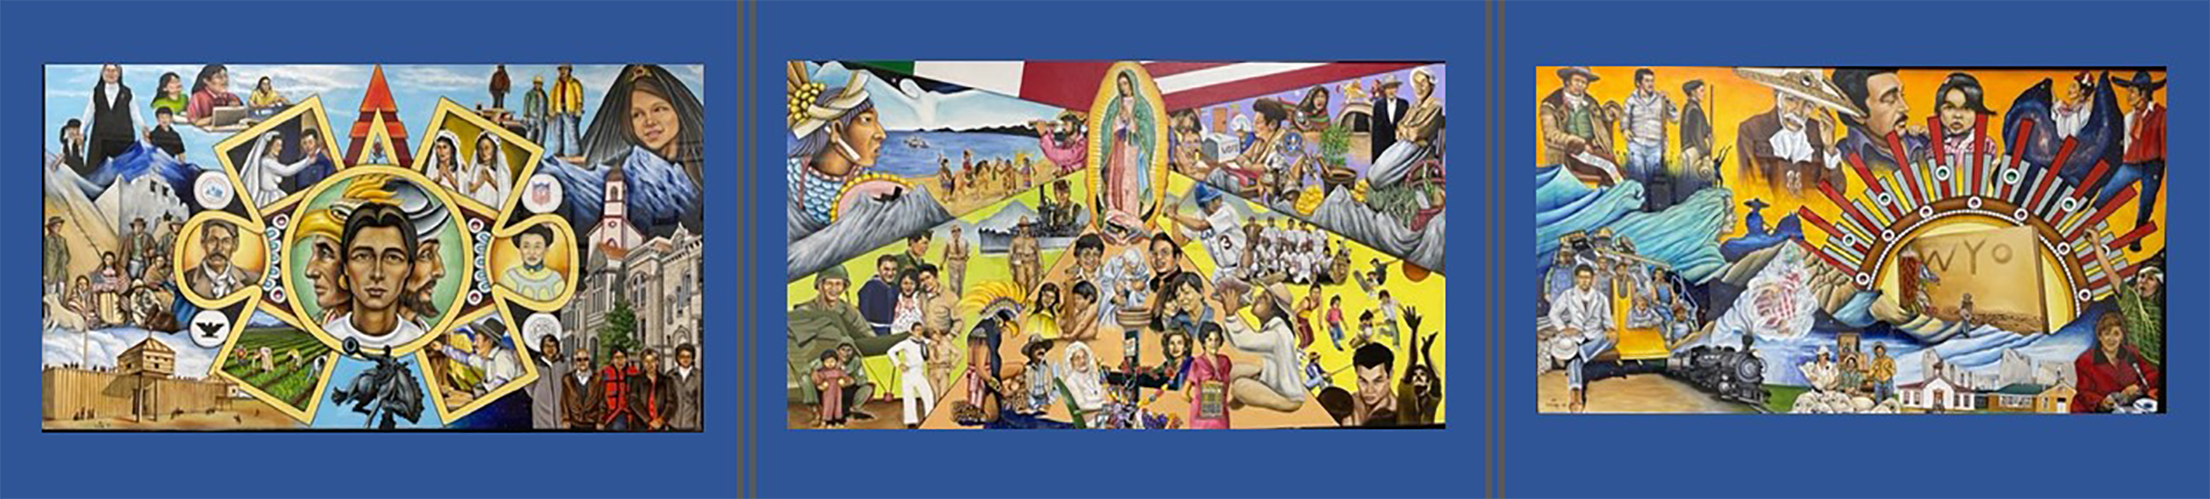 collage of several latinx cultural images